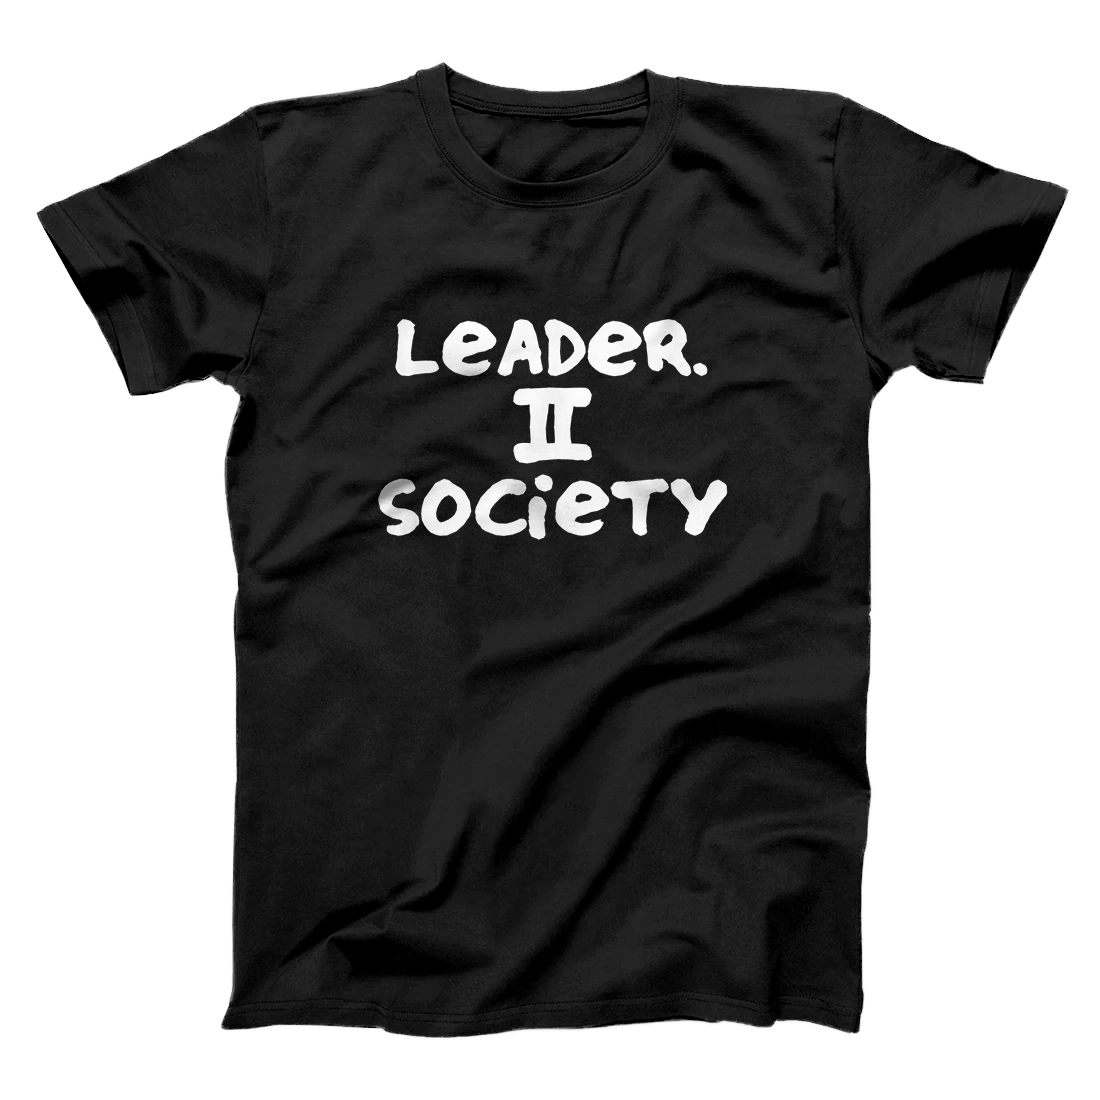 Personalized Leader to Society - L.E.A.D.E.R. - Leader II Society T-Shirt